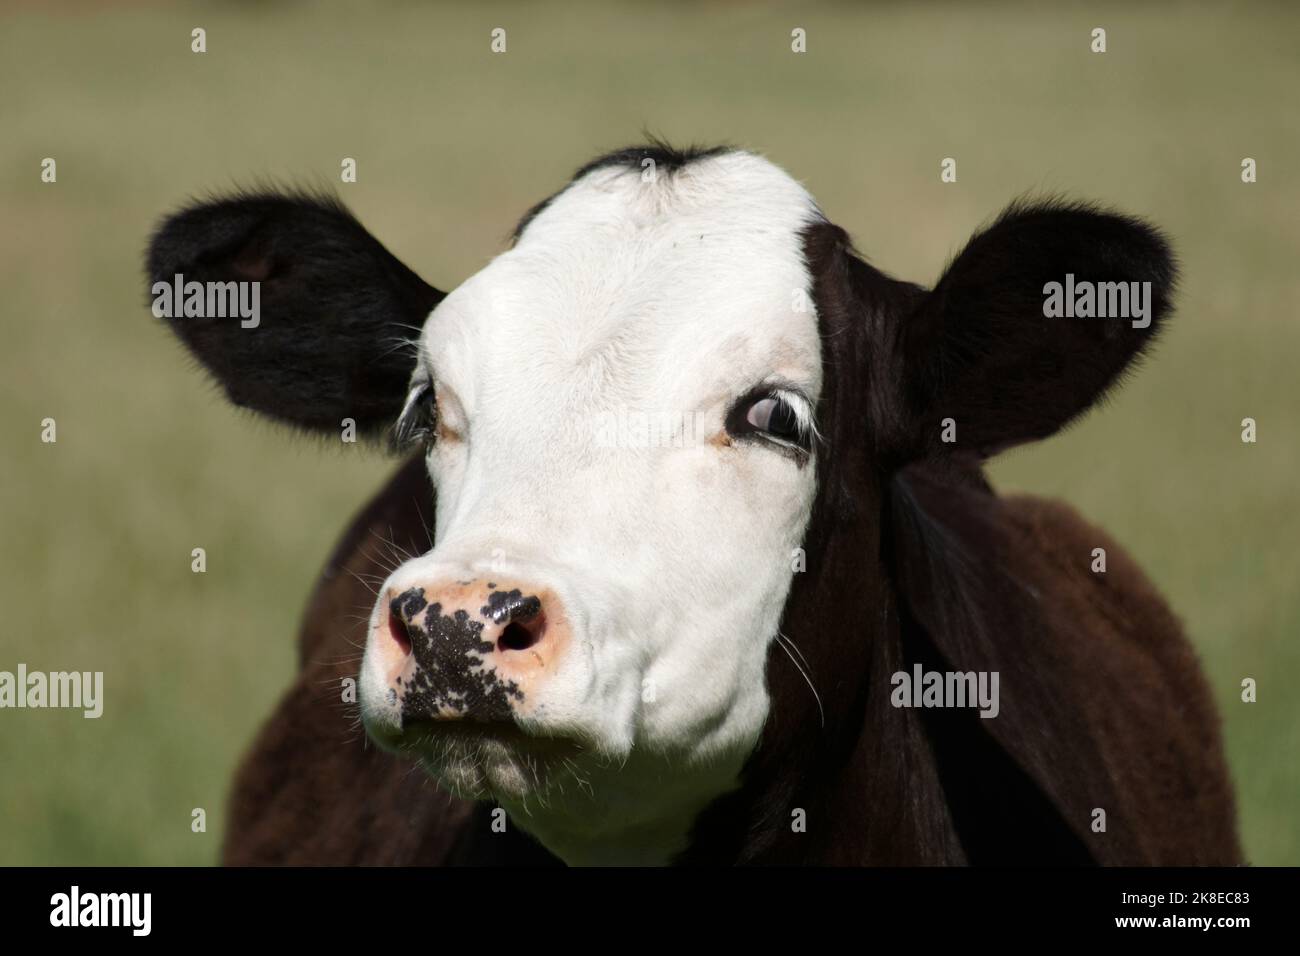 Portrait of a young black cow with white head. It's looking at the camera from the corner of its eye. It is probably an old Dutch breed called blaarko Stock Photo